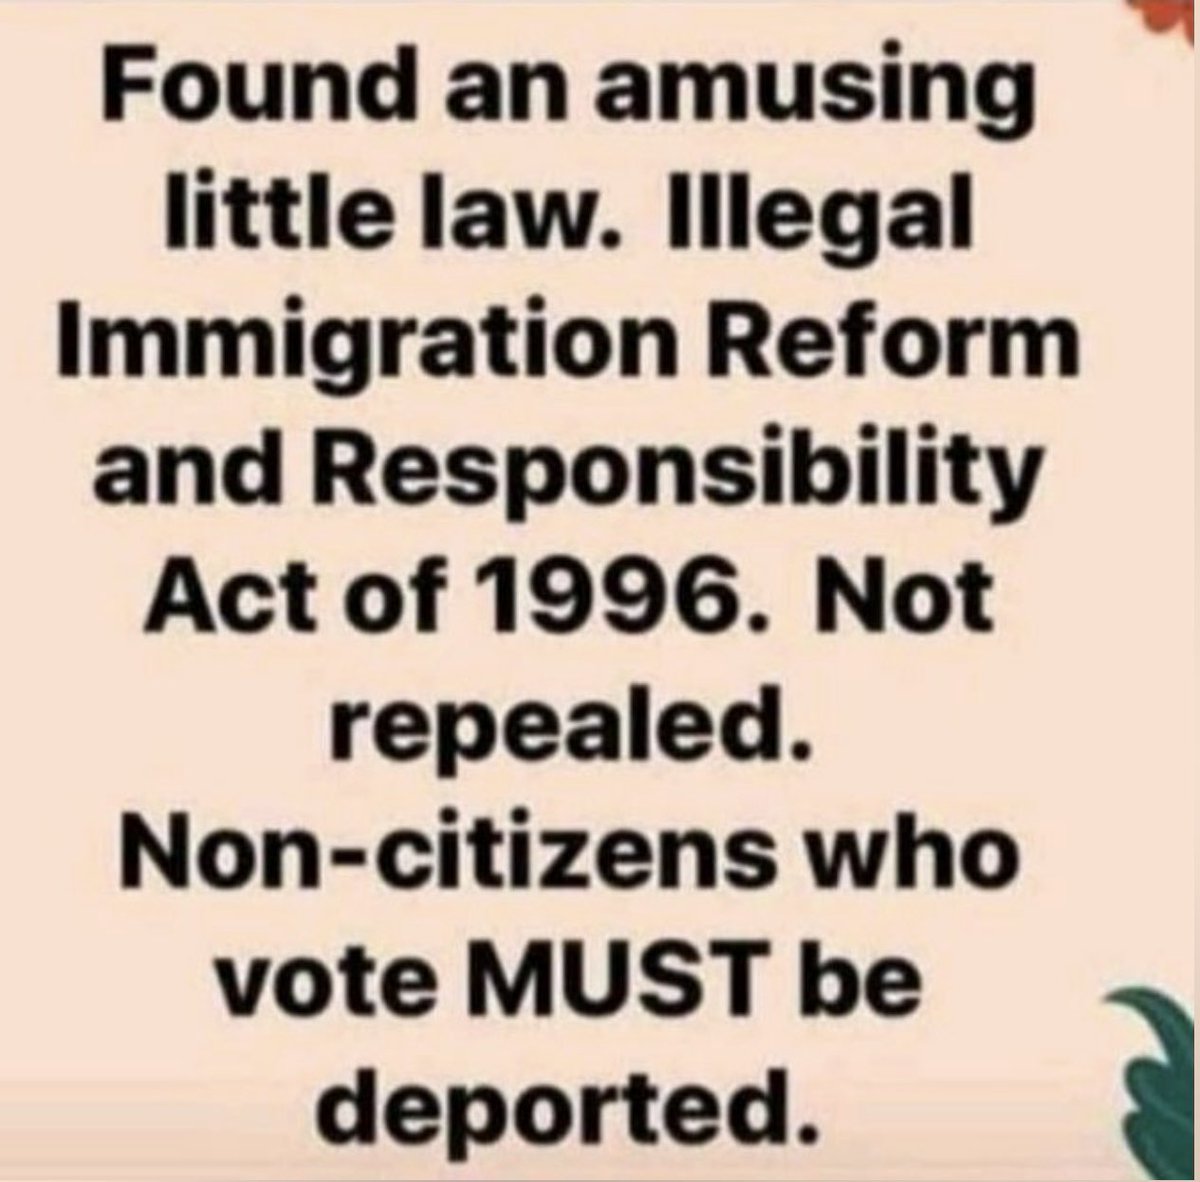 Great how about we deport them ALL !